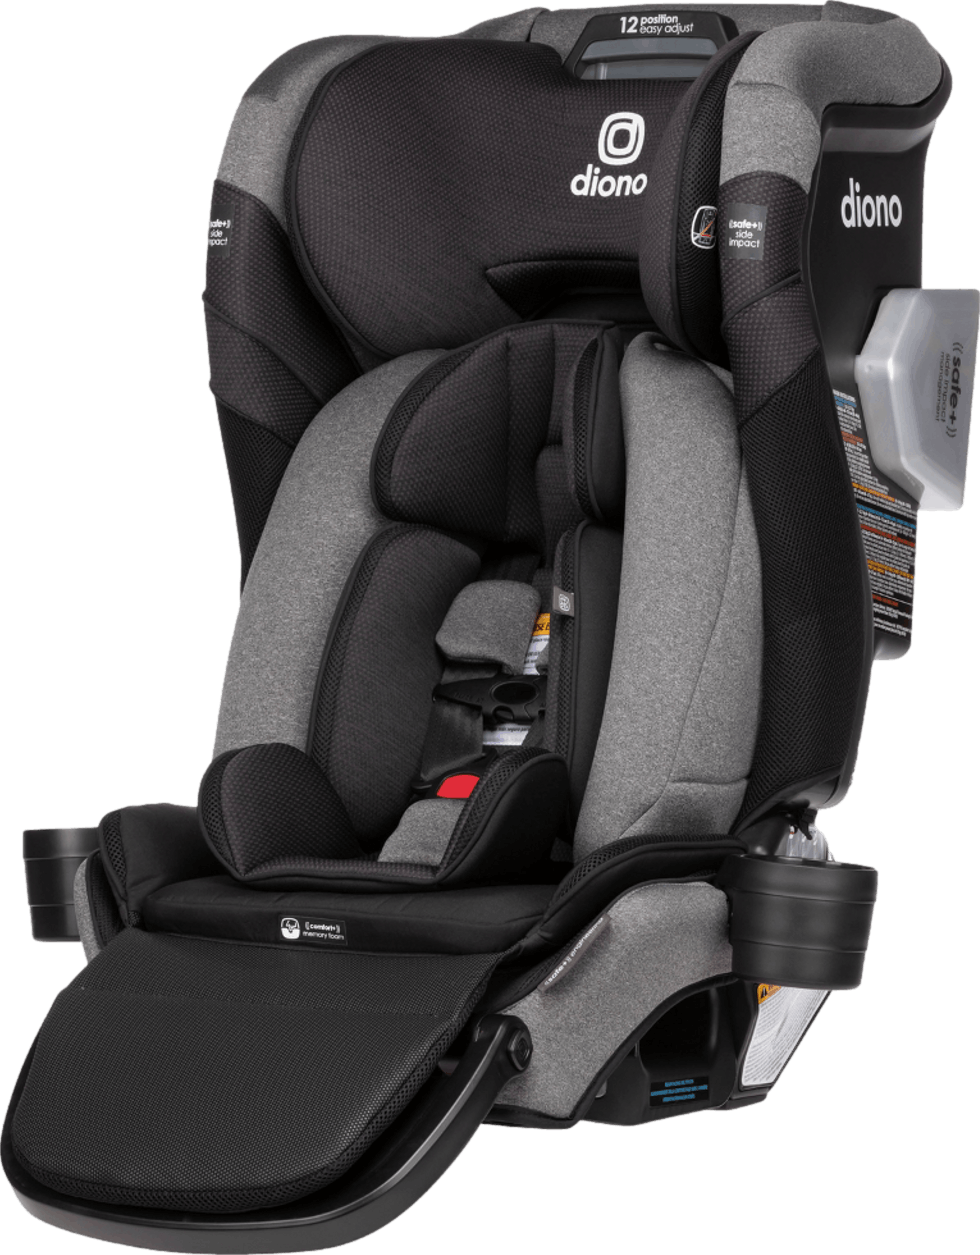 Diono Radian® 3QXT+ All-in-One Convertible Car Seat